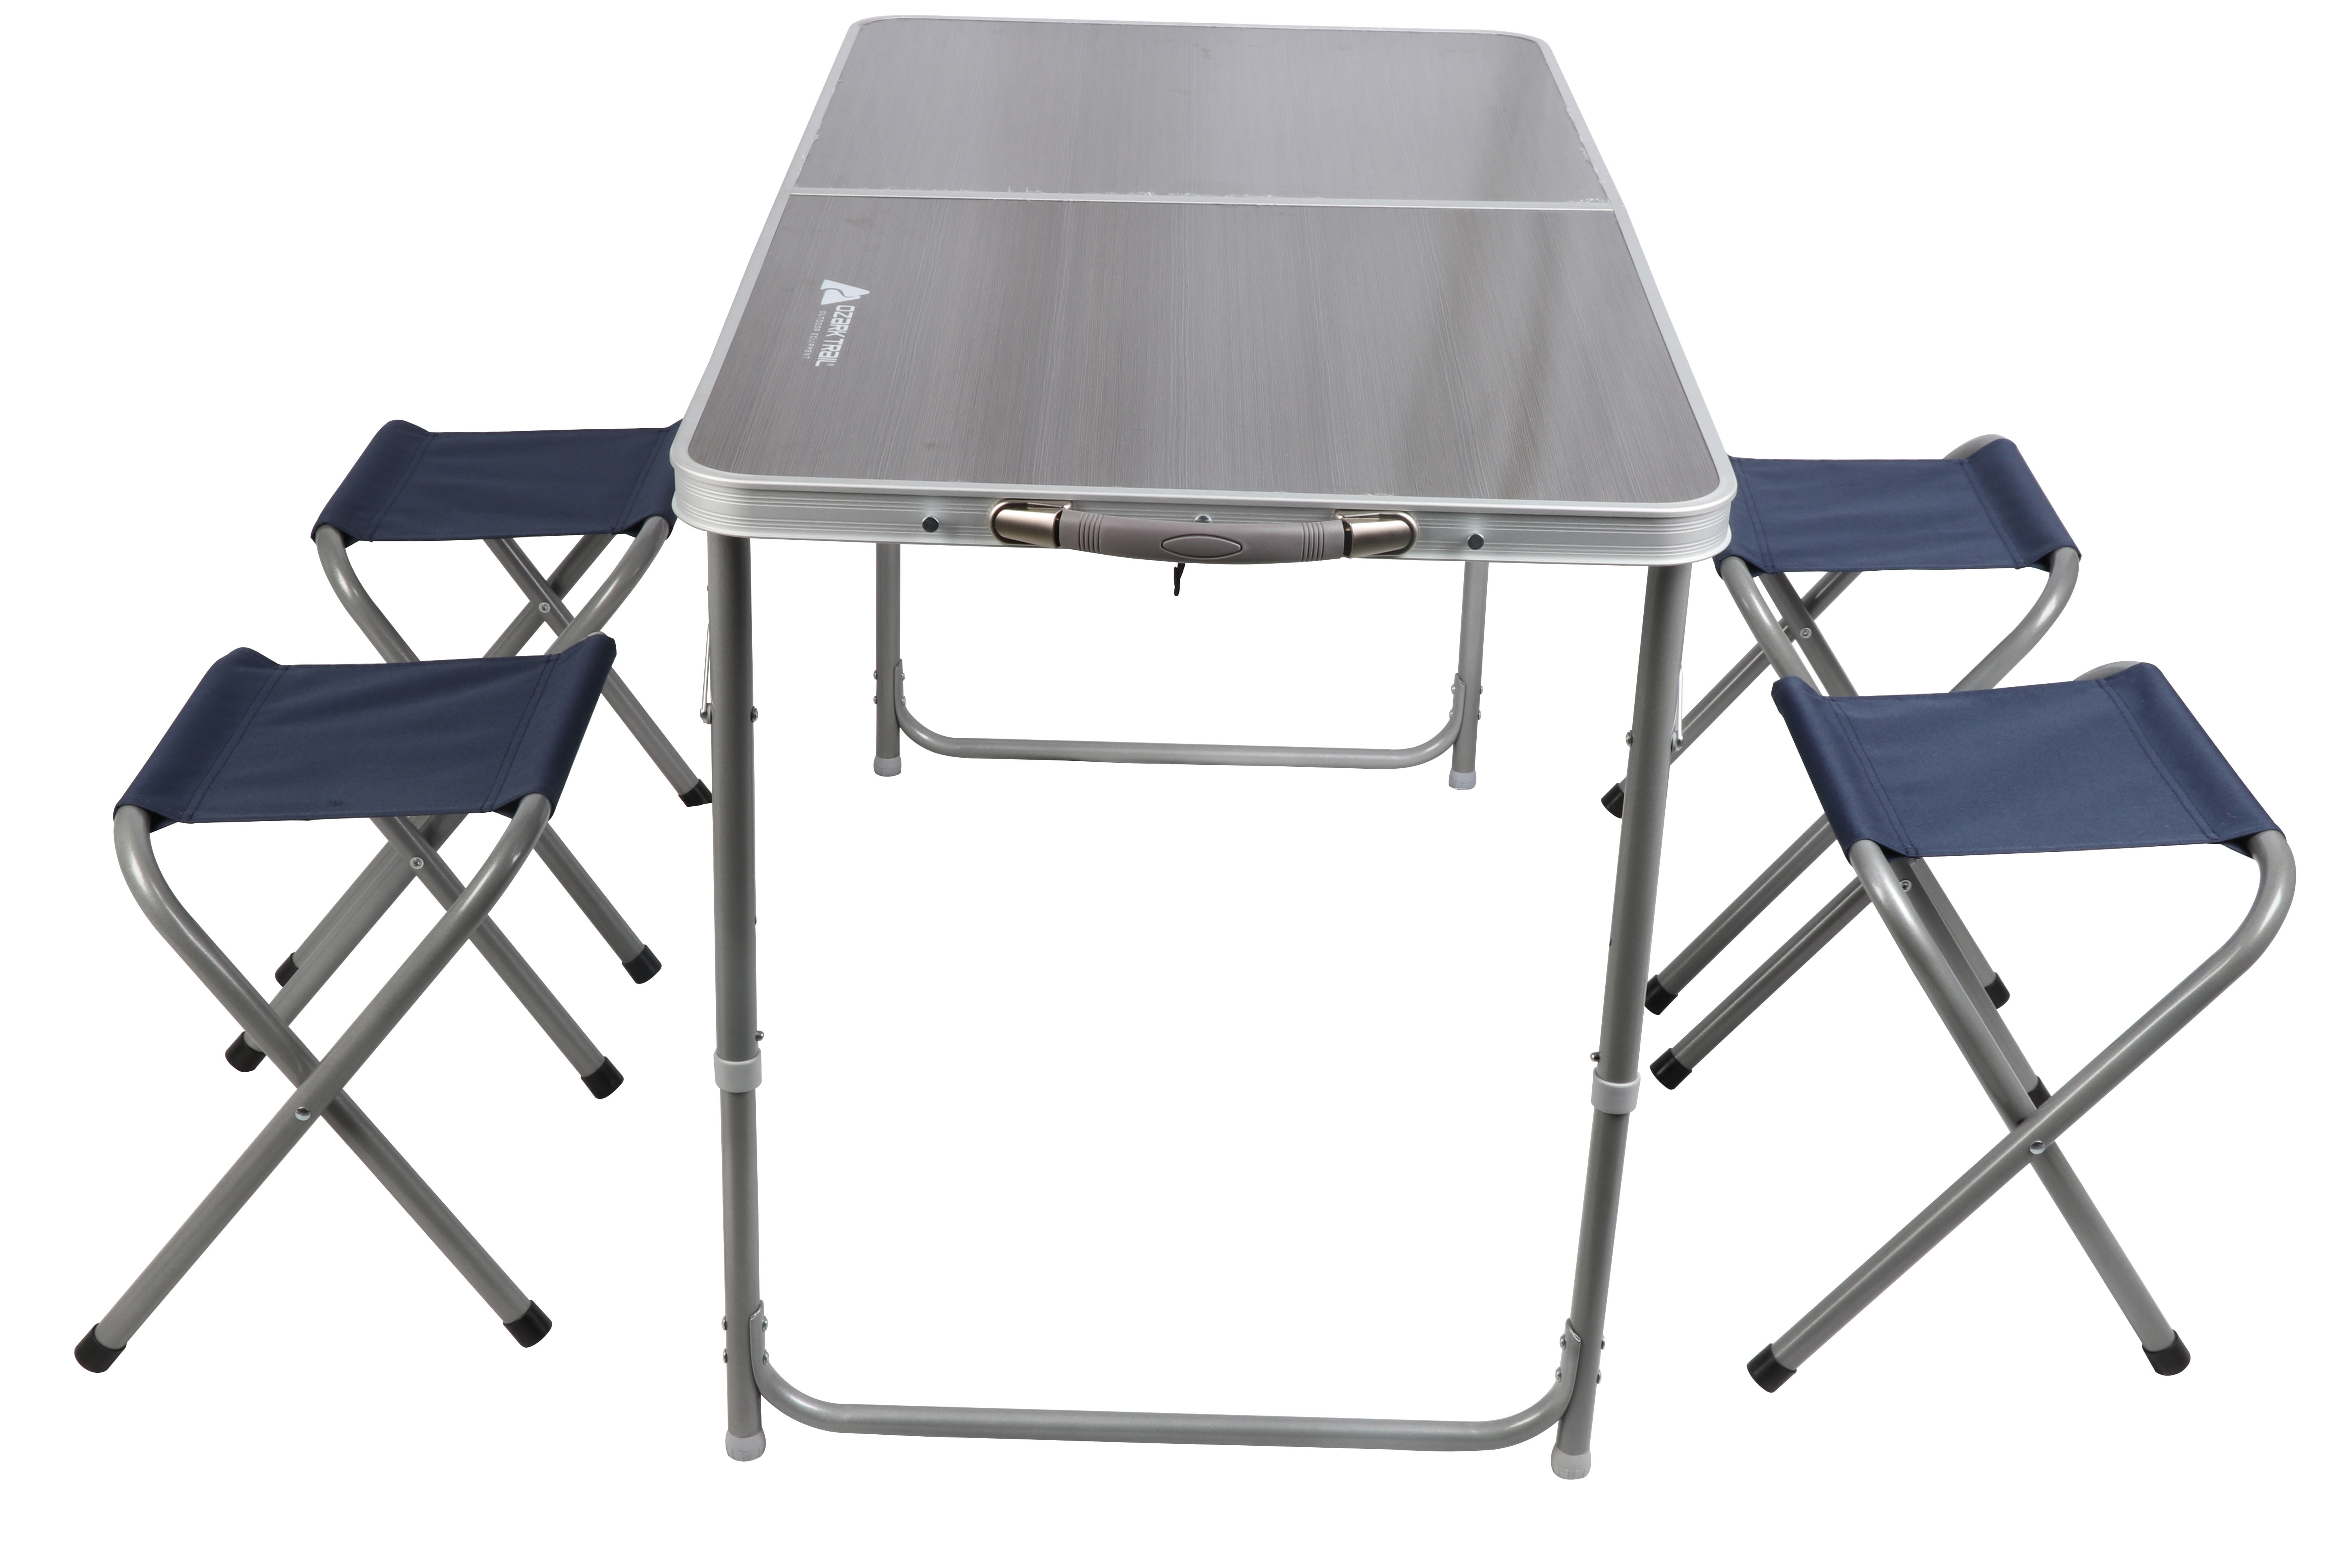 Aluminium Portable Outdoor Fold Up Table for Garden Adjustable Height Heavy Duty Picnic Table Set for 4 Person REDCAMP Folding Camping Table with Chairs